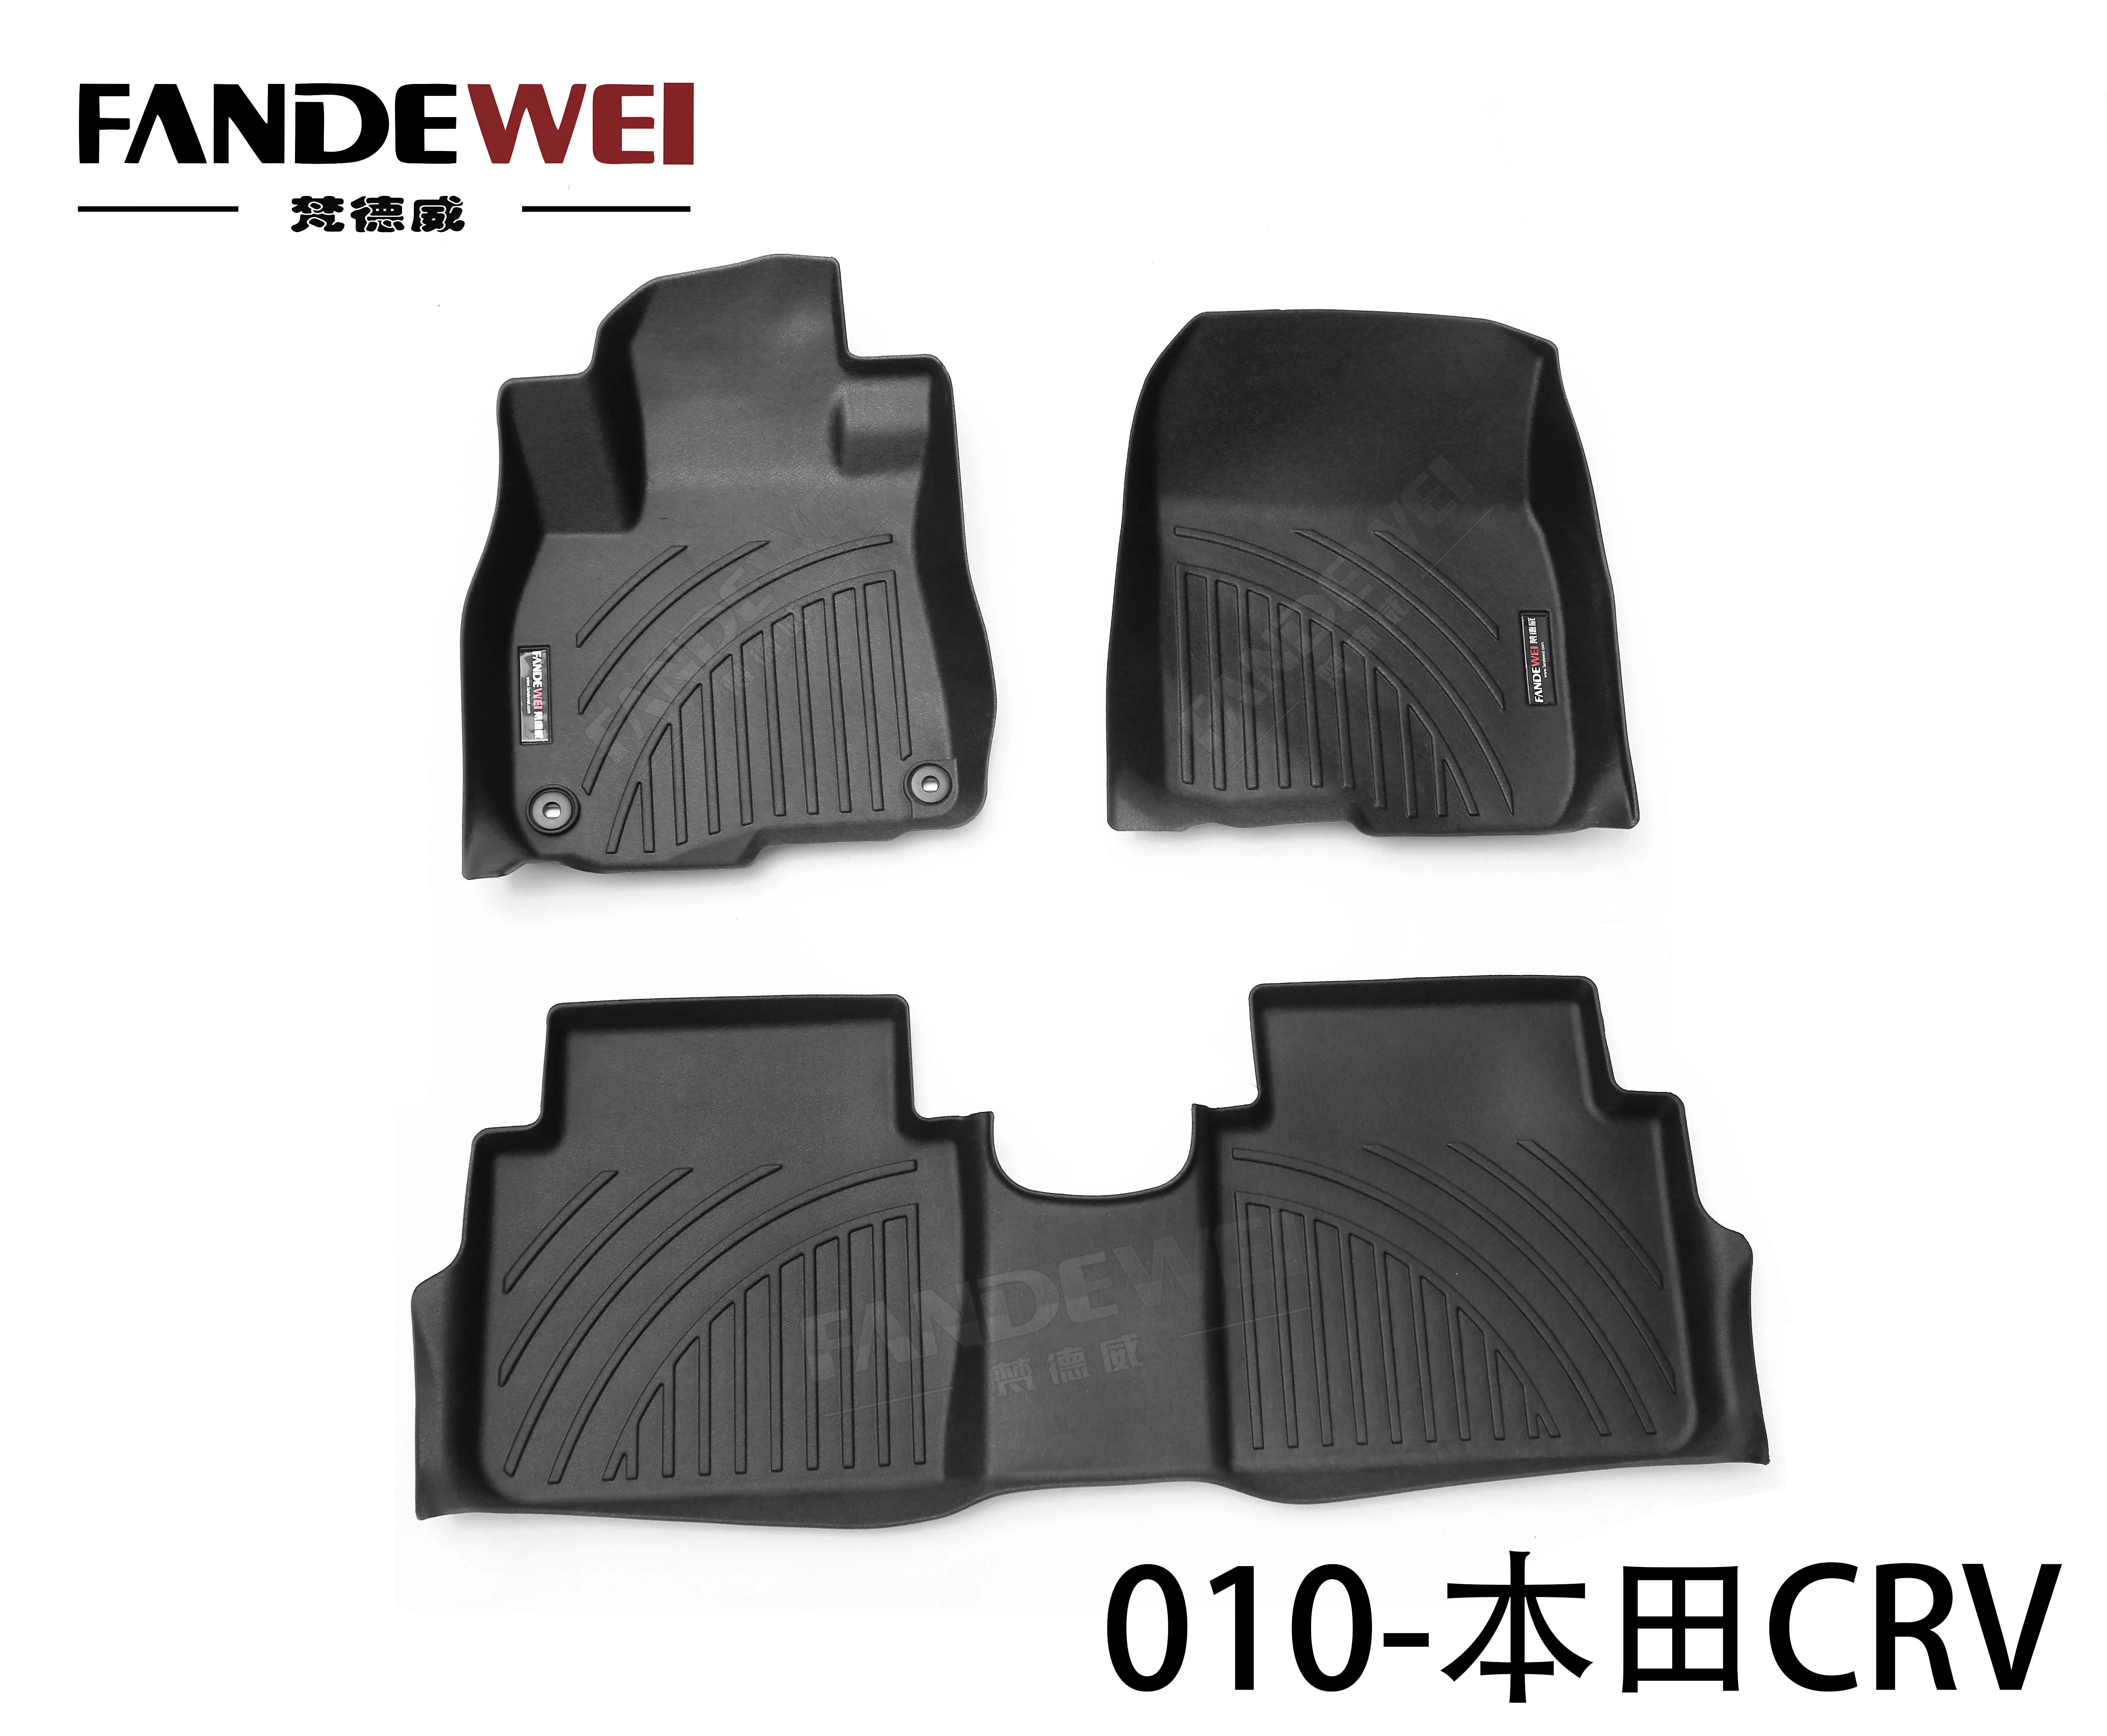 New Type Top Sale Waterproof Easy To Clean 3d Car Mats Used For Honda Crv Buy Waterproof Car Carpet Weather Tech Car Floor Mats Car Carpet Cleaning Product On Alibaba Com